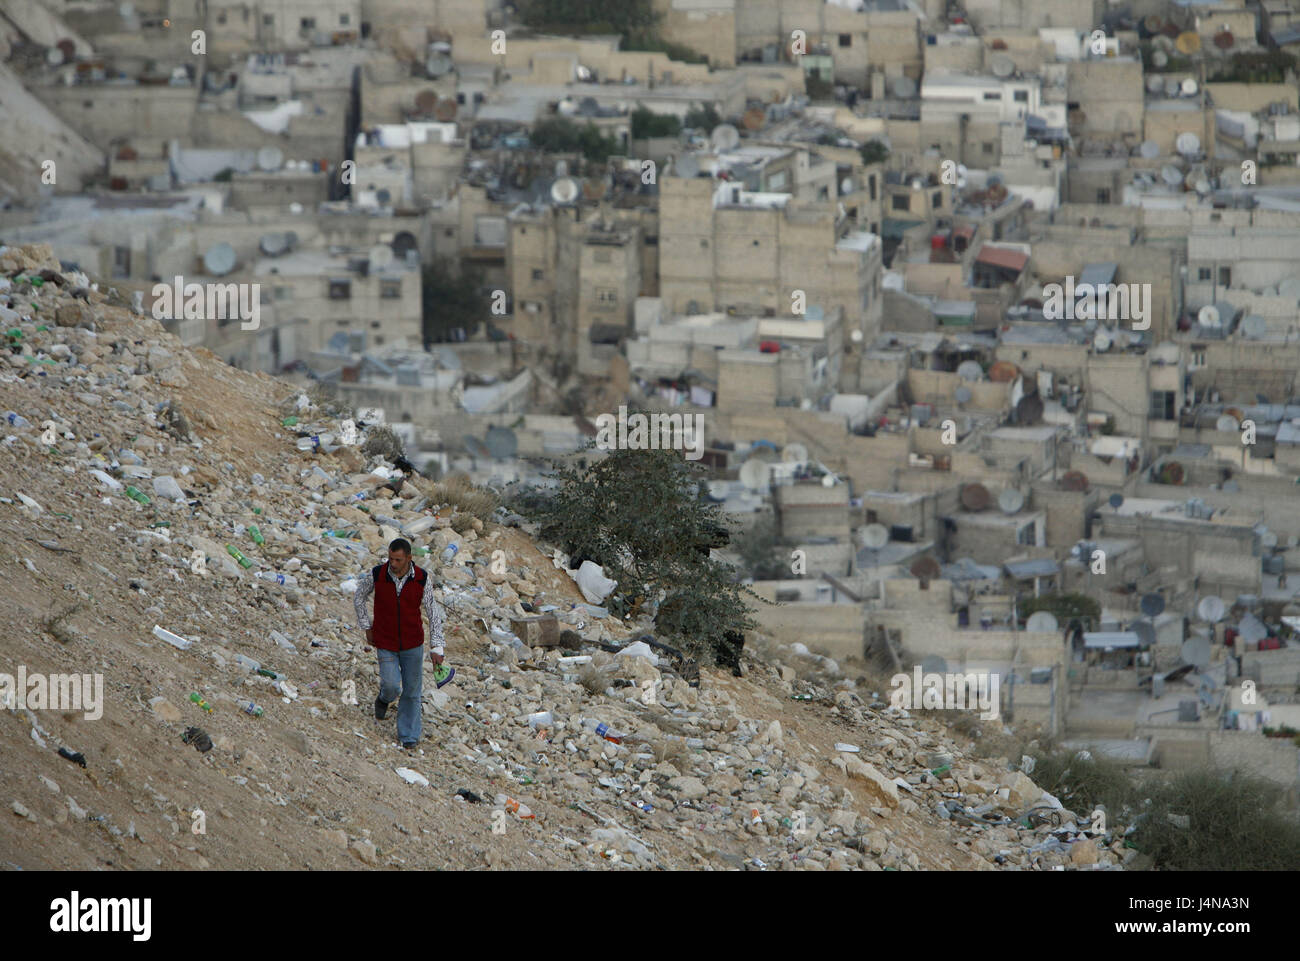 Syria, Damascus, town view, inclination, waste, man, no model release, Neustadt, city centre, city centre, urbanity, architecture, residential houses, closely, close, city, stones, grits, people, garbage, Weihrauchstrasse Stock Photo